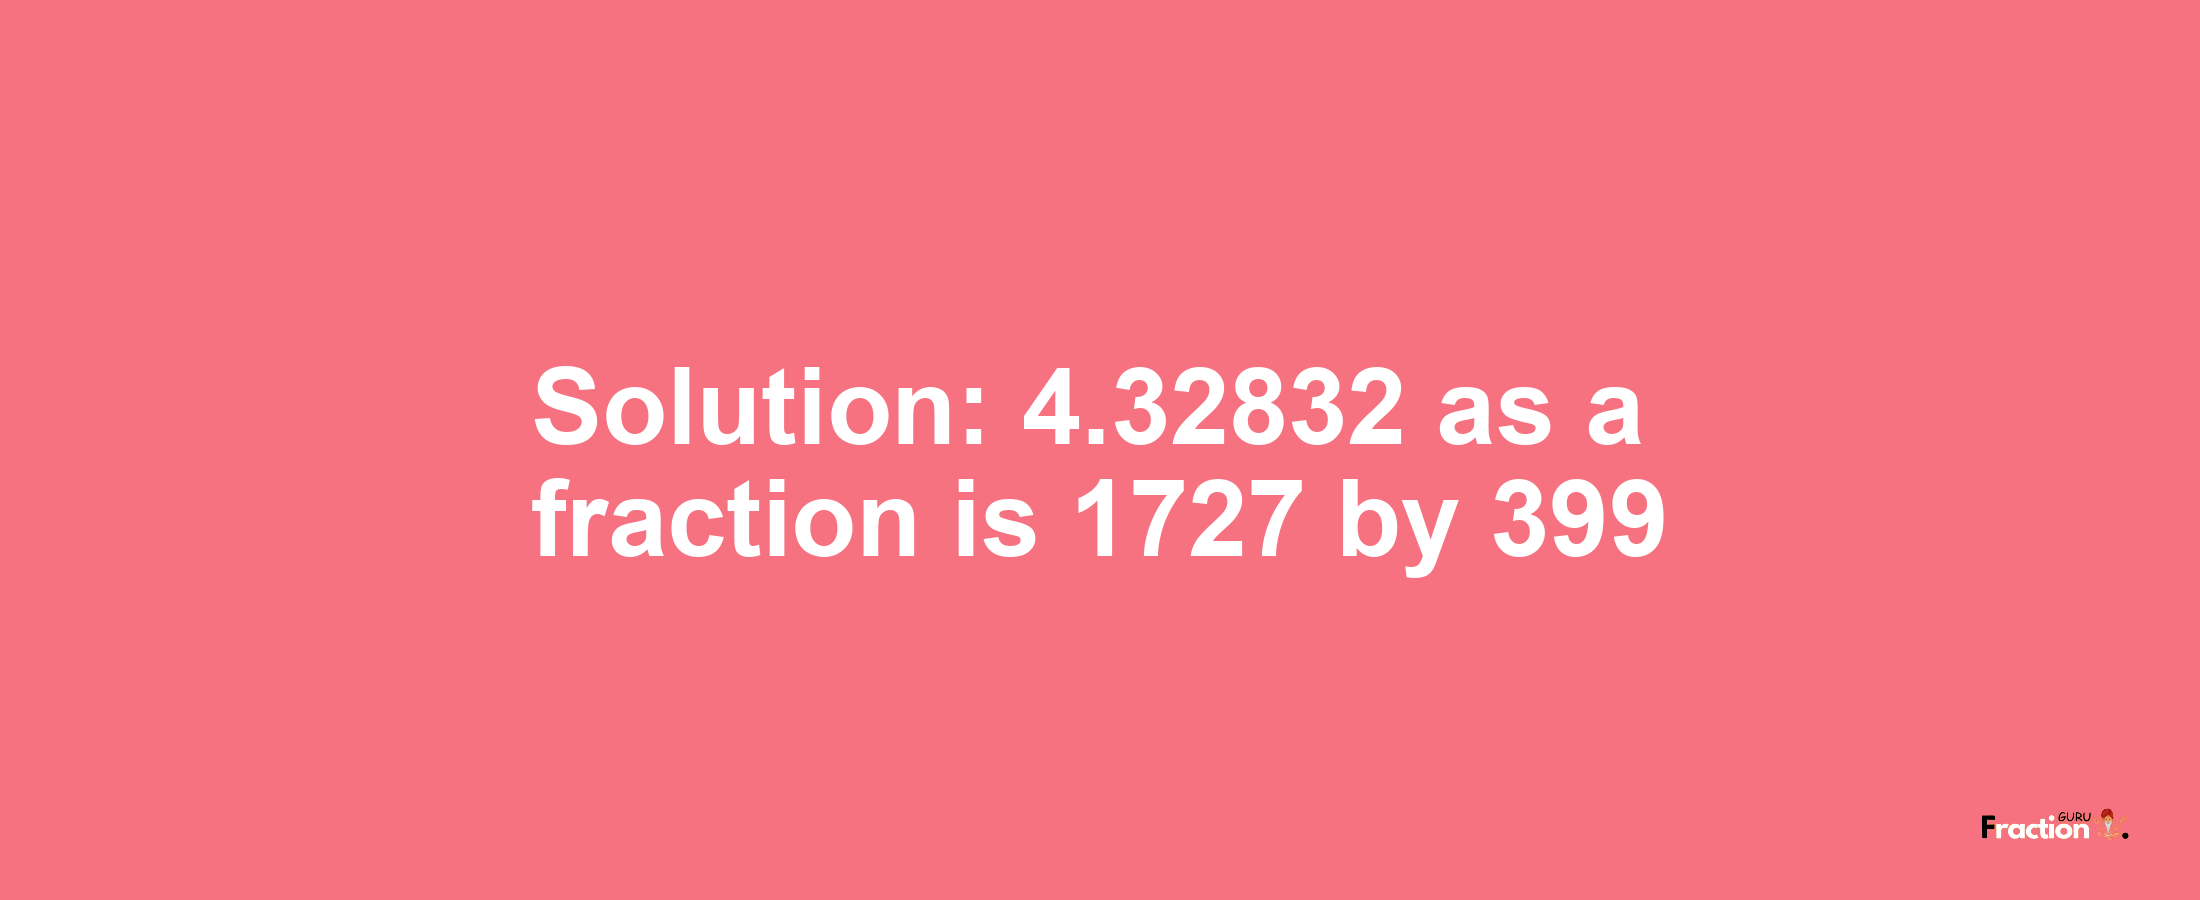 Solution:4.32832 as a fraction is 1727/399